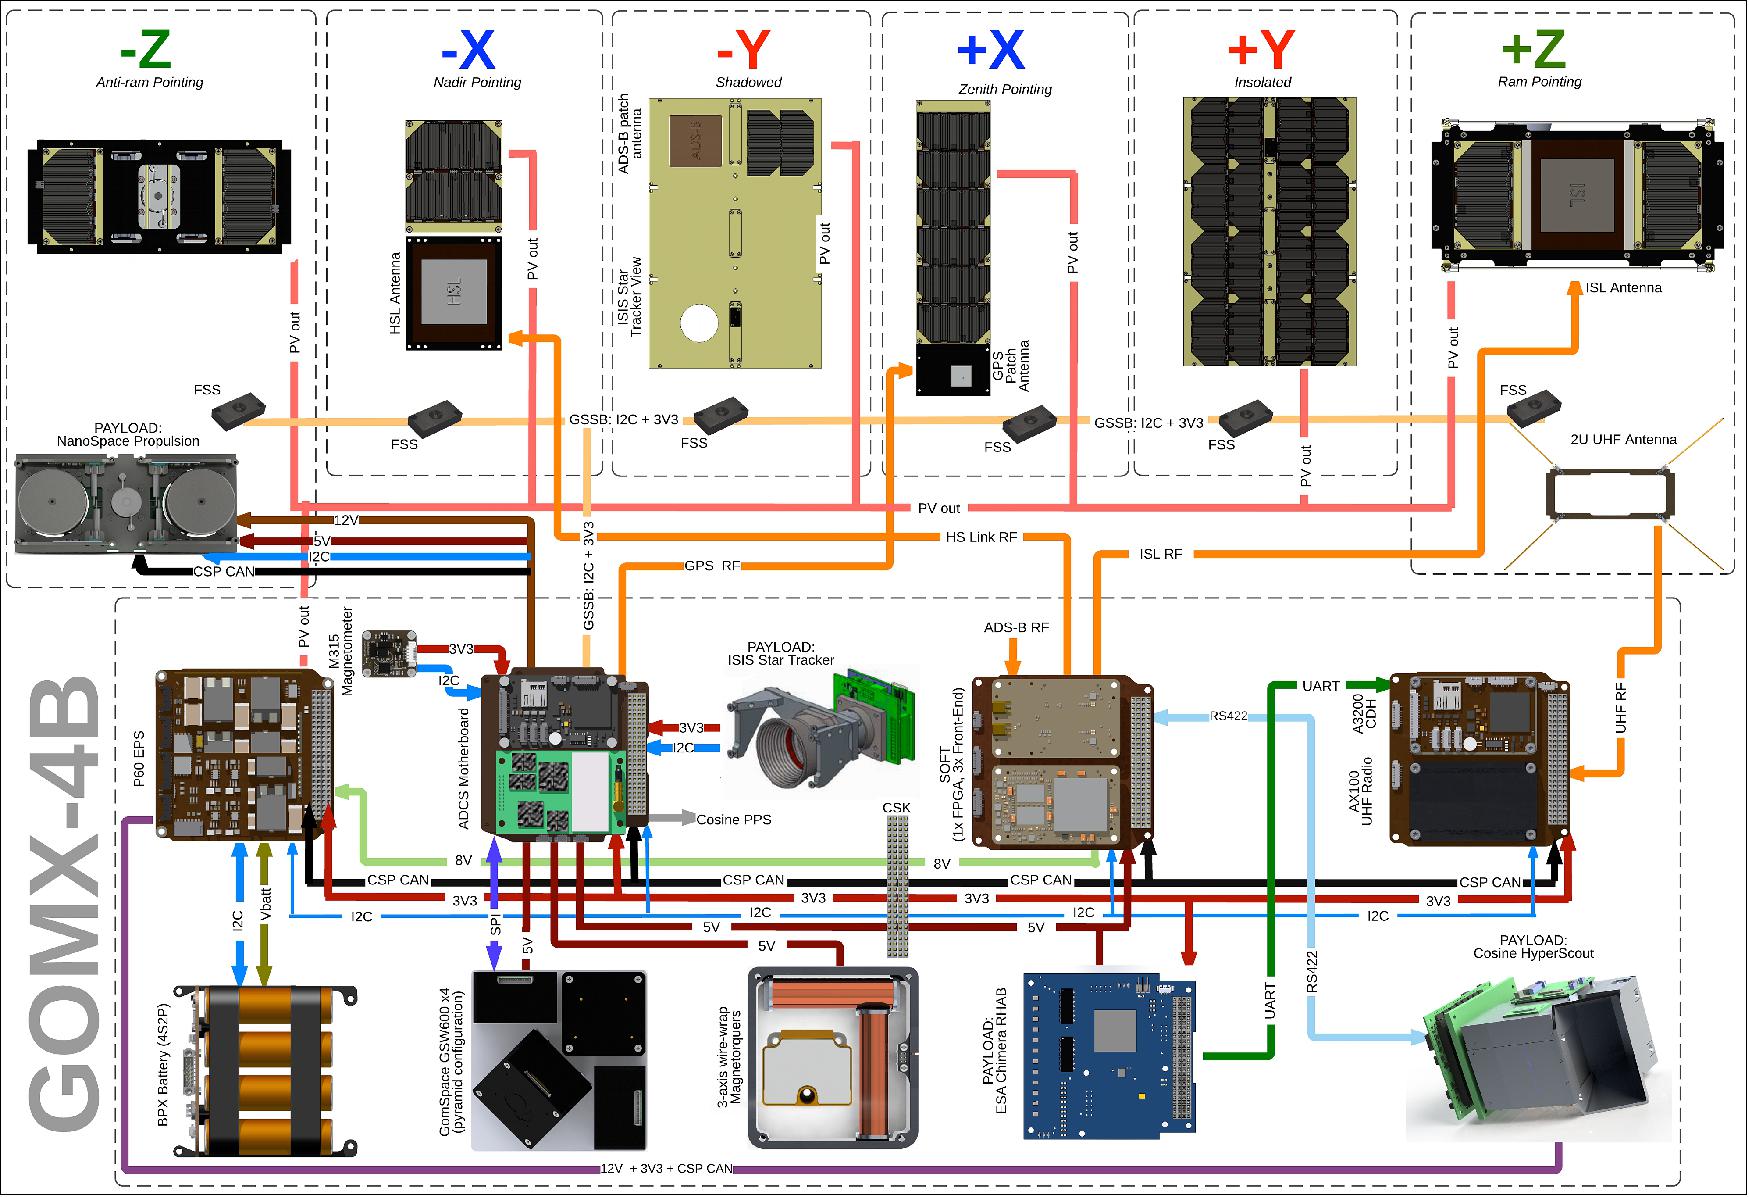 Figure 3: System diagram for the GomX-4B satellite (image credit: GomSpace)